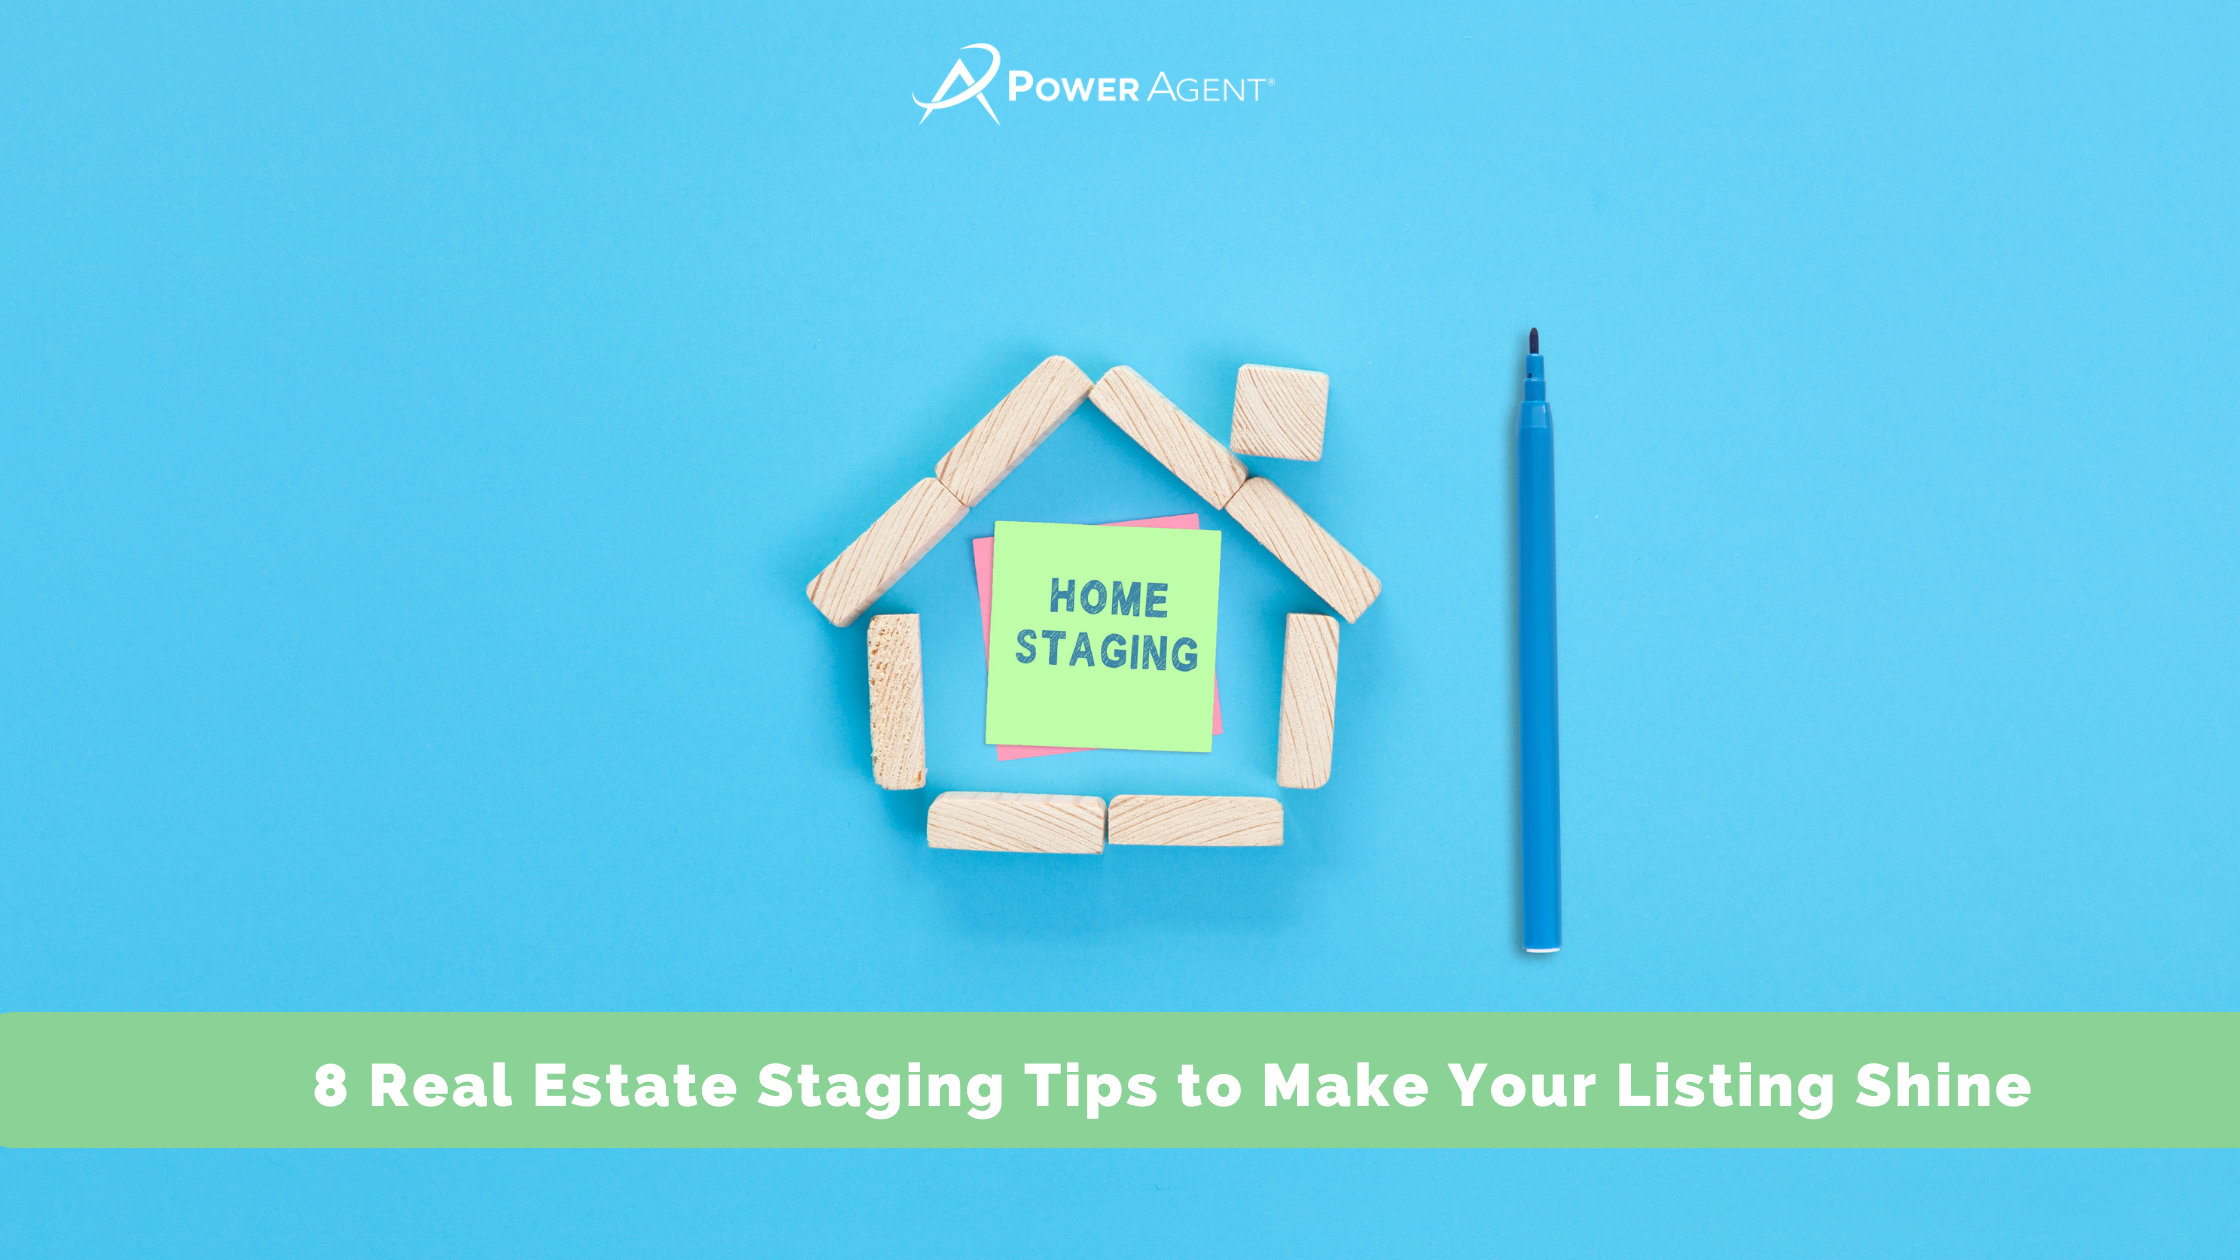 8 Real Estate Staging Tips to Make Your Listing Shine